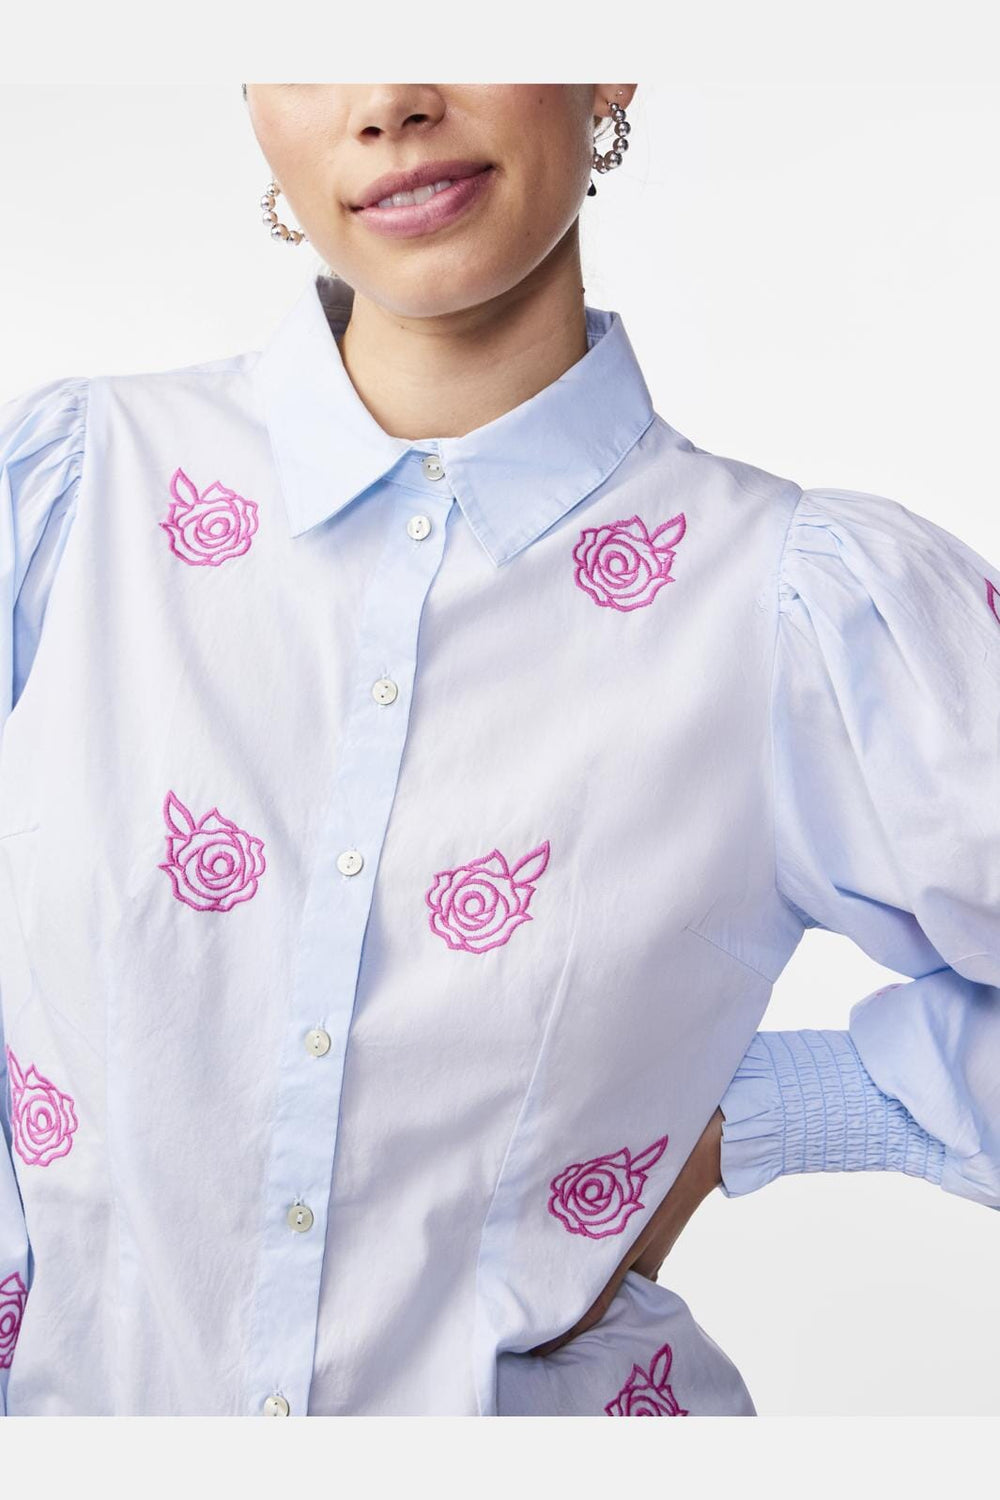 Y.A.S - Yasbella Ls Shirt - 4431603 Omphalodes W. Embroidery